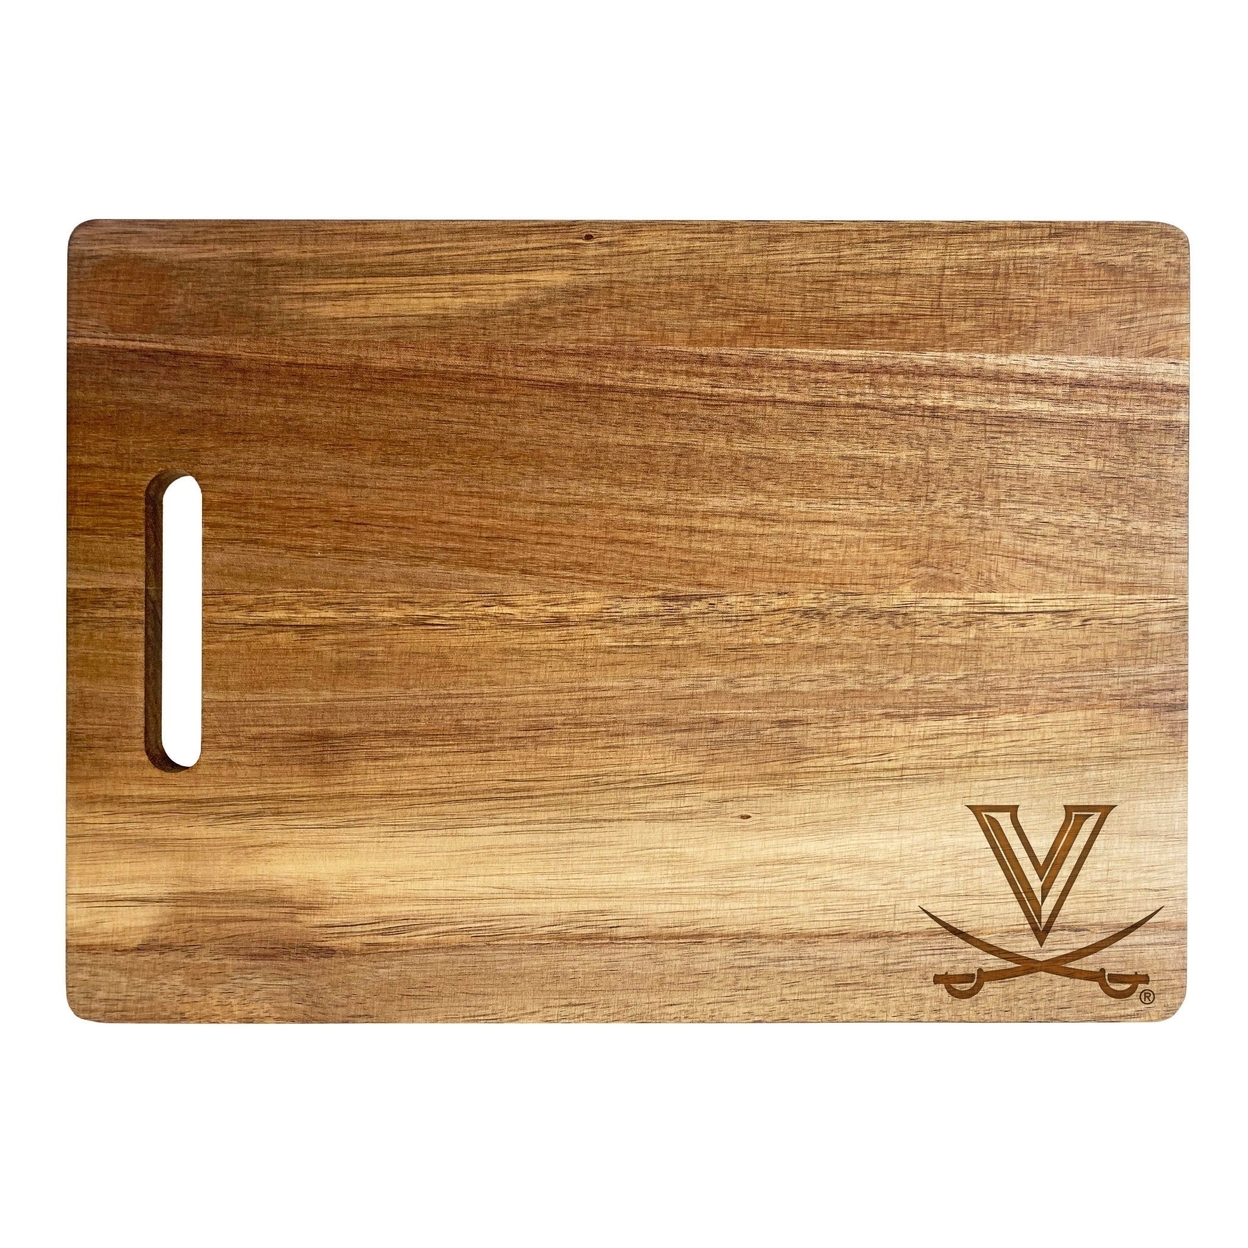 Virginia Cavaliers Engraved Wooden Cutting Board 10 X 14 Acacia Wood - Small Engraving